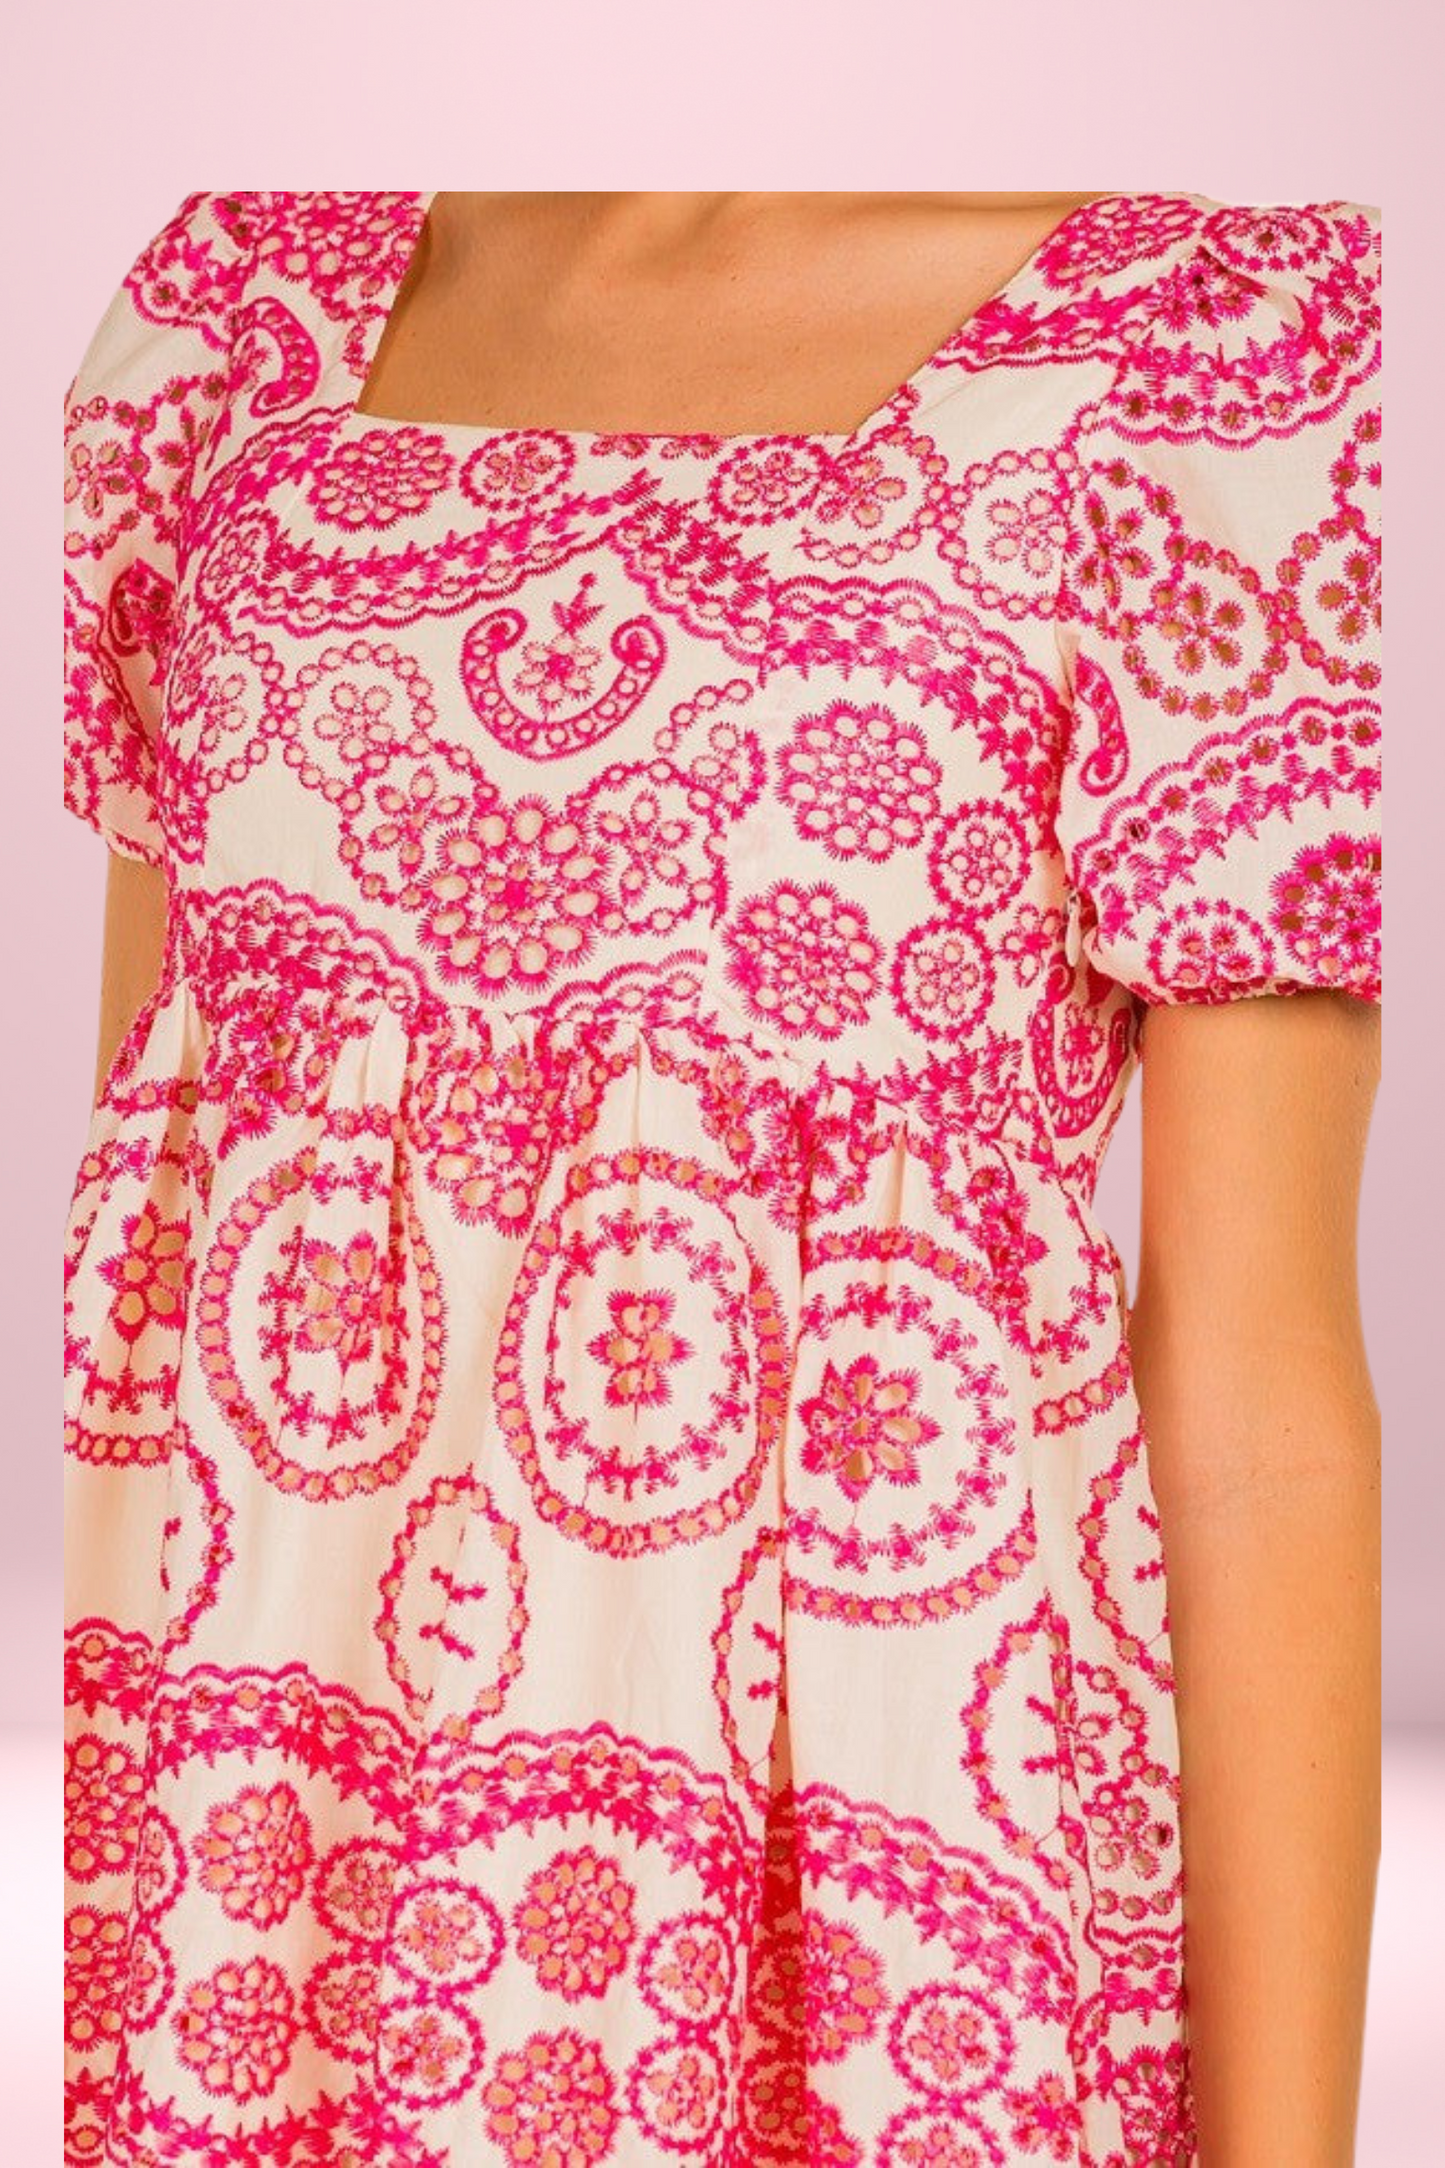 The Pink Embroidered Mini Dress